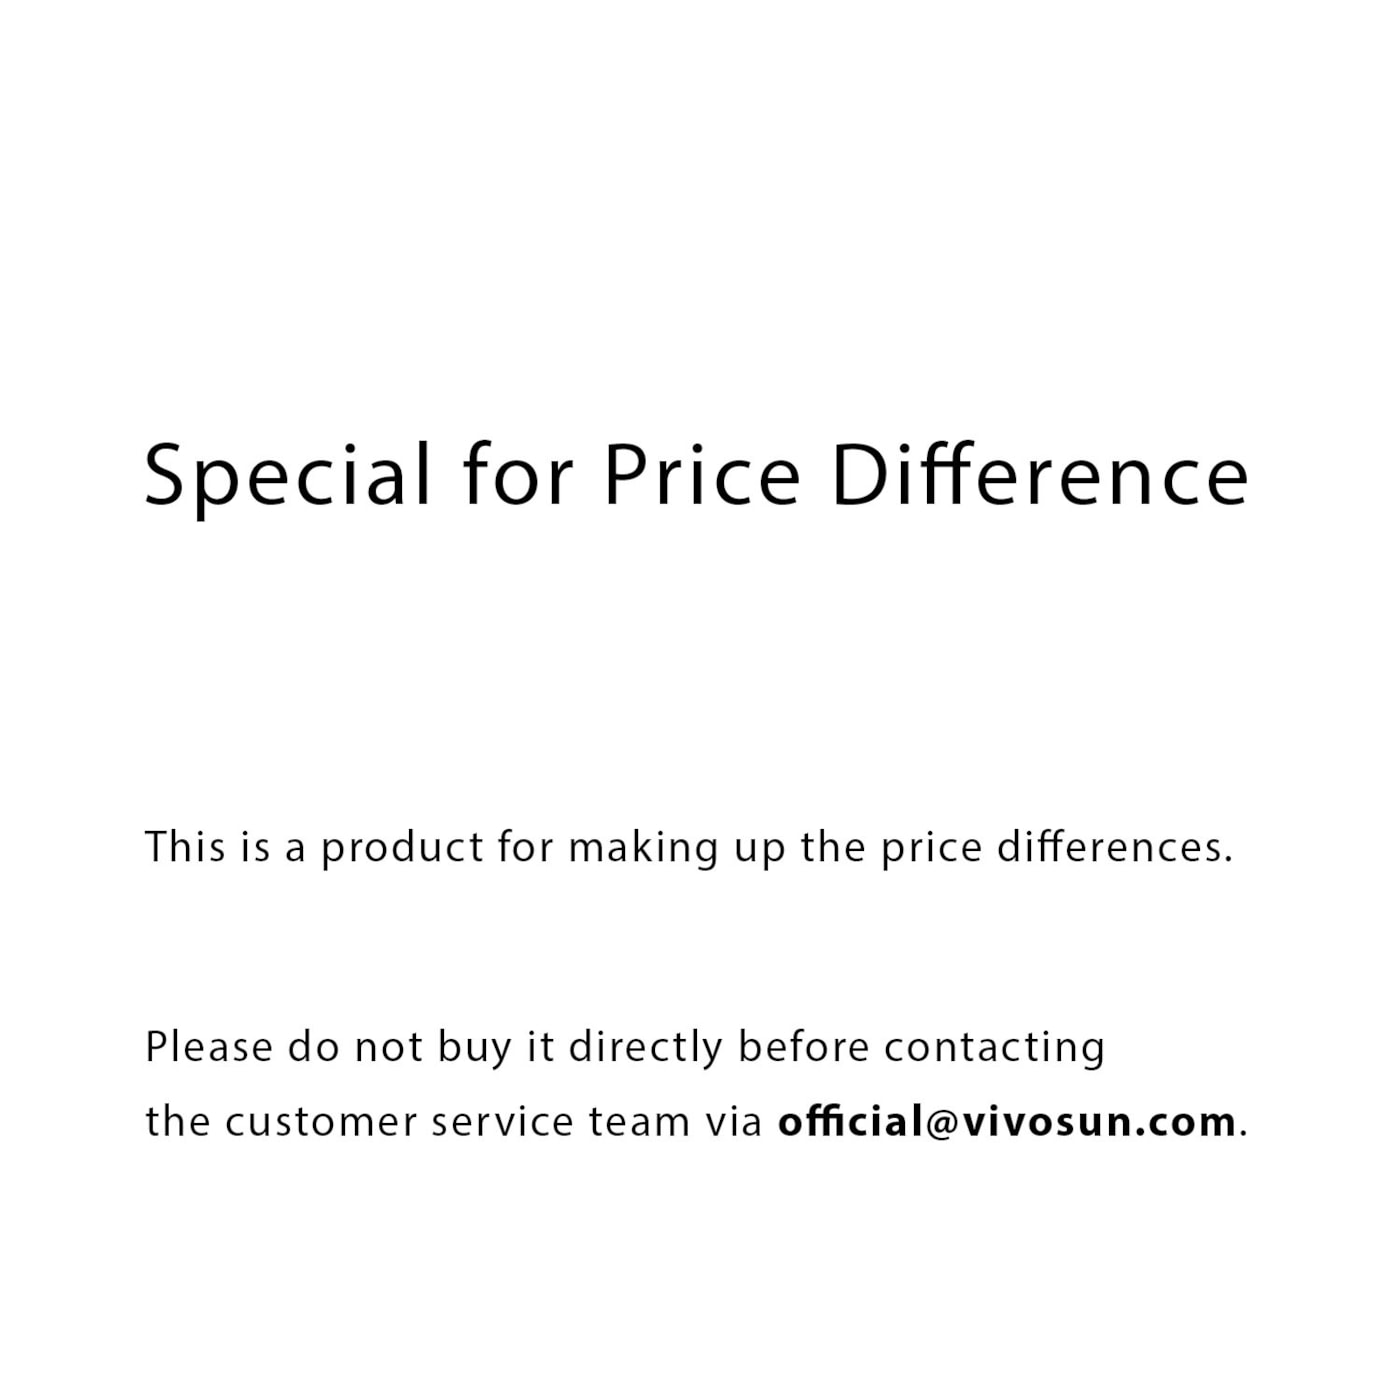 [Special For Price Differences] VIVOSUN Exclusive Product by Customer Service